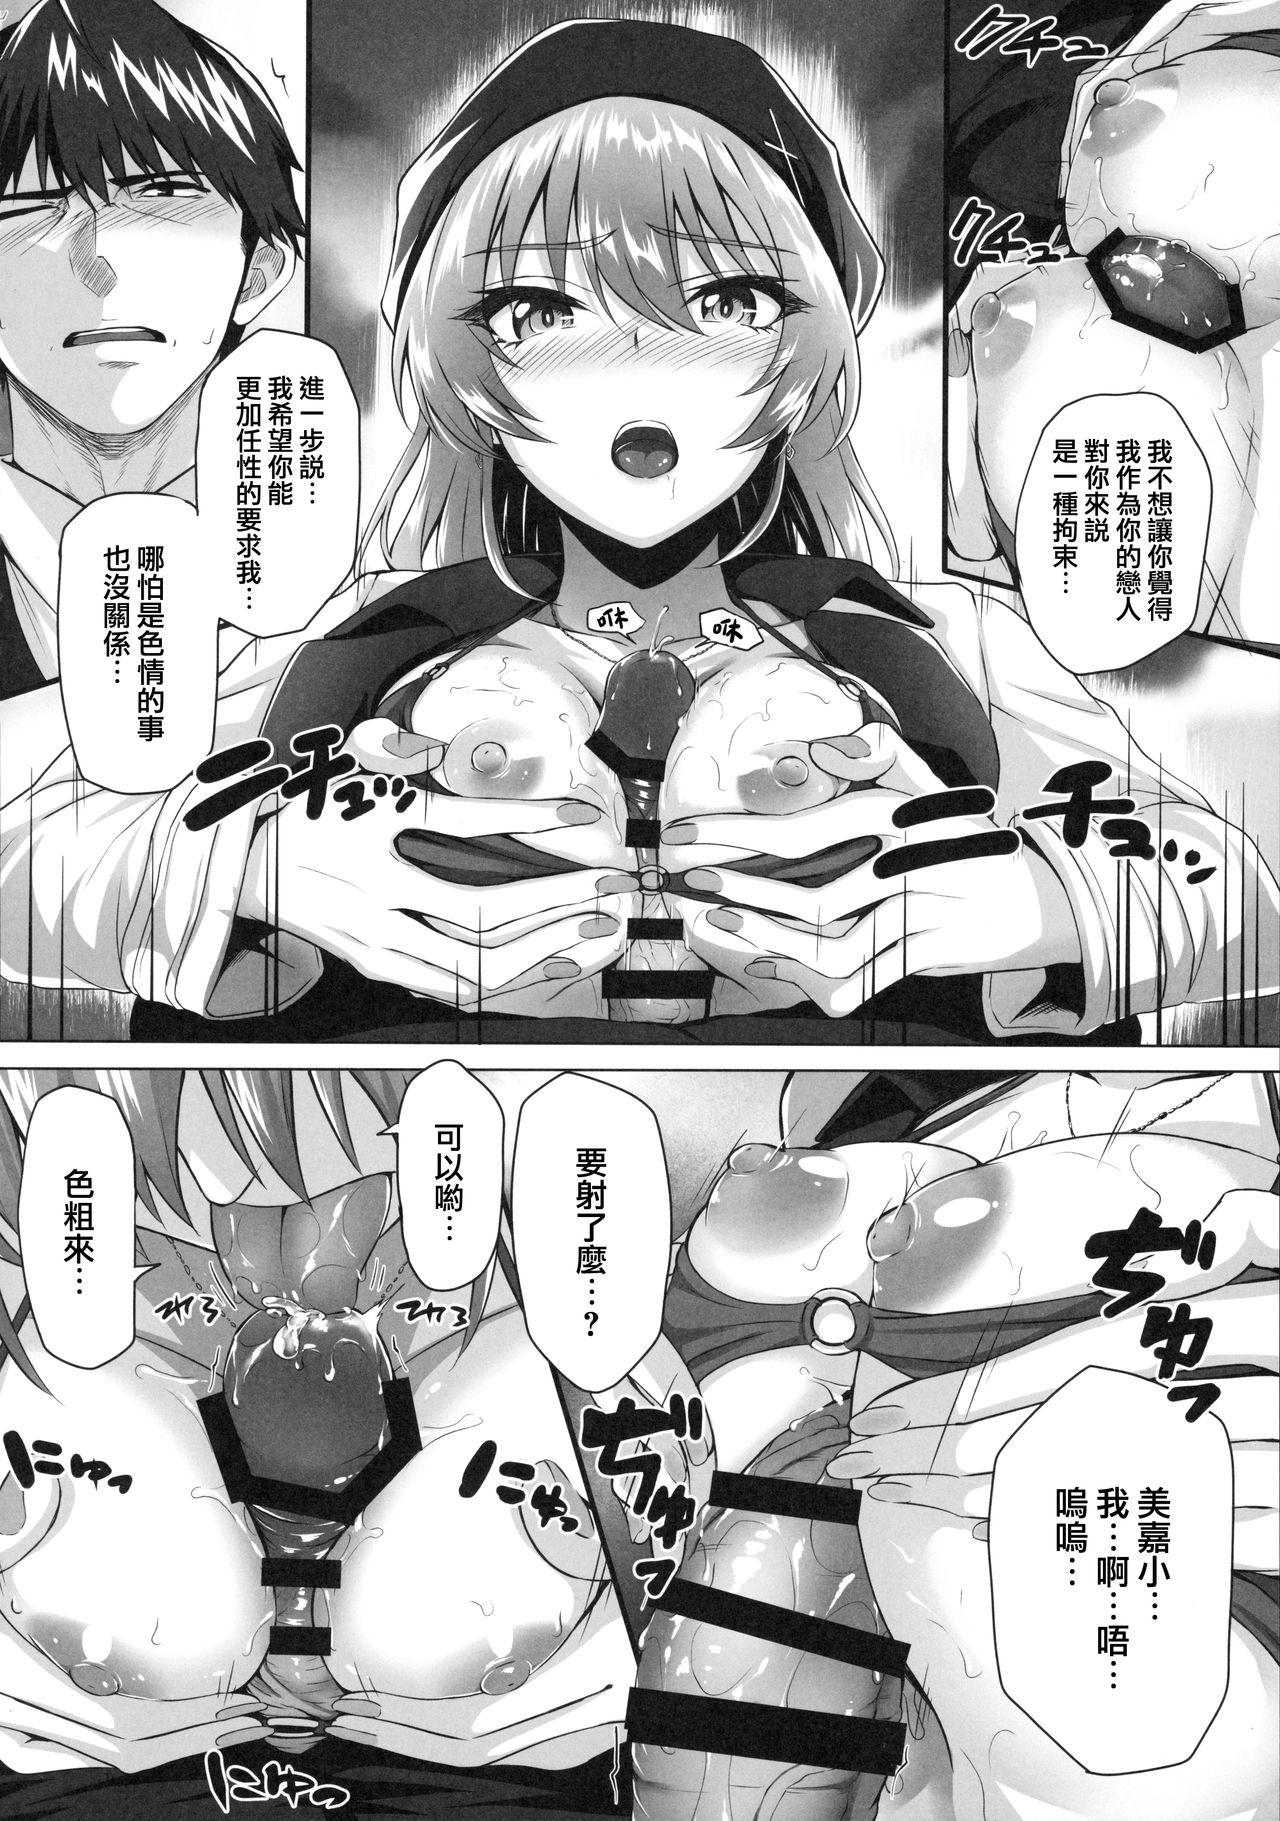 Funny Mika and P Plus - The idolmaster Housewife - Page 12